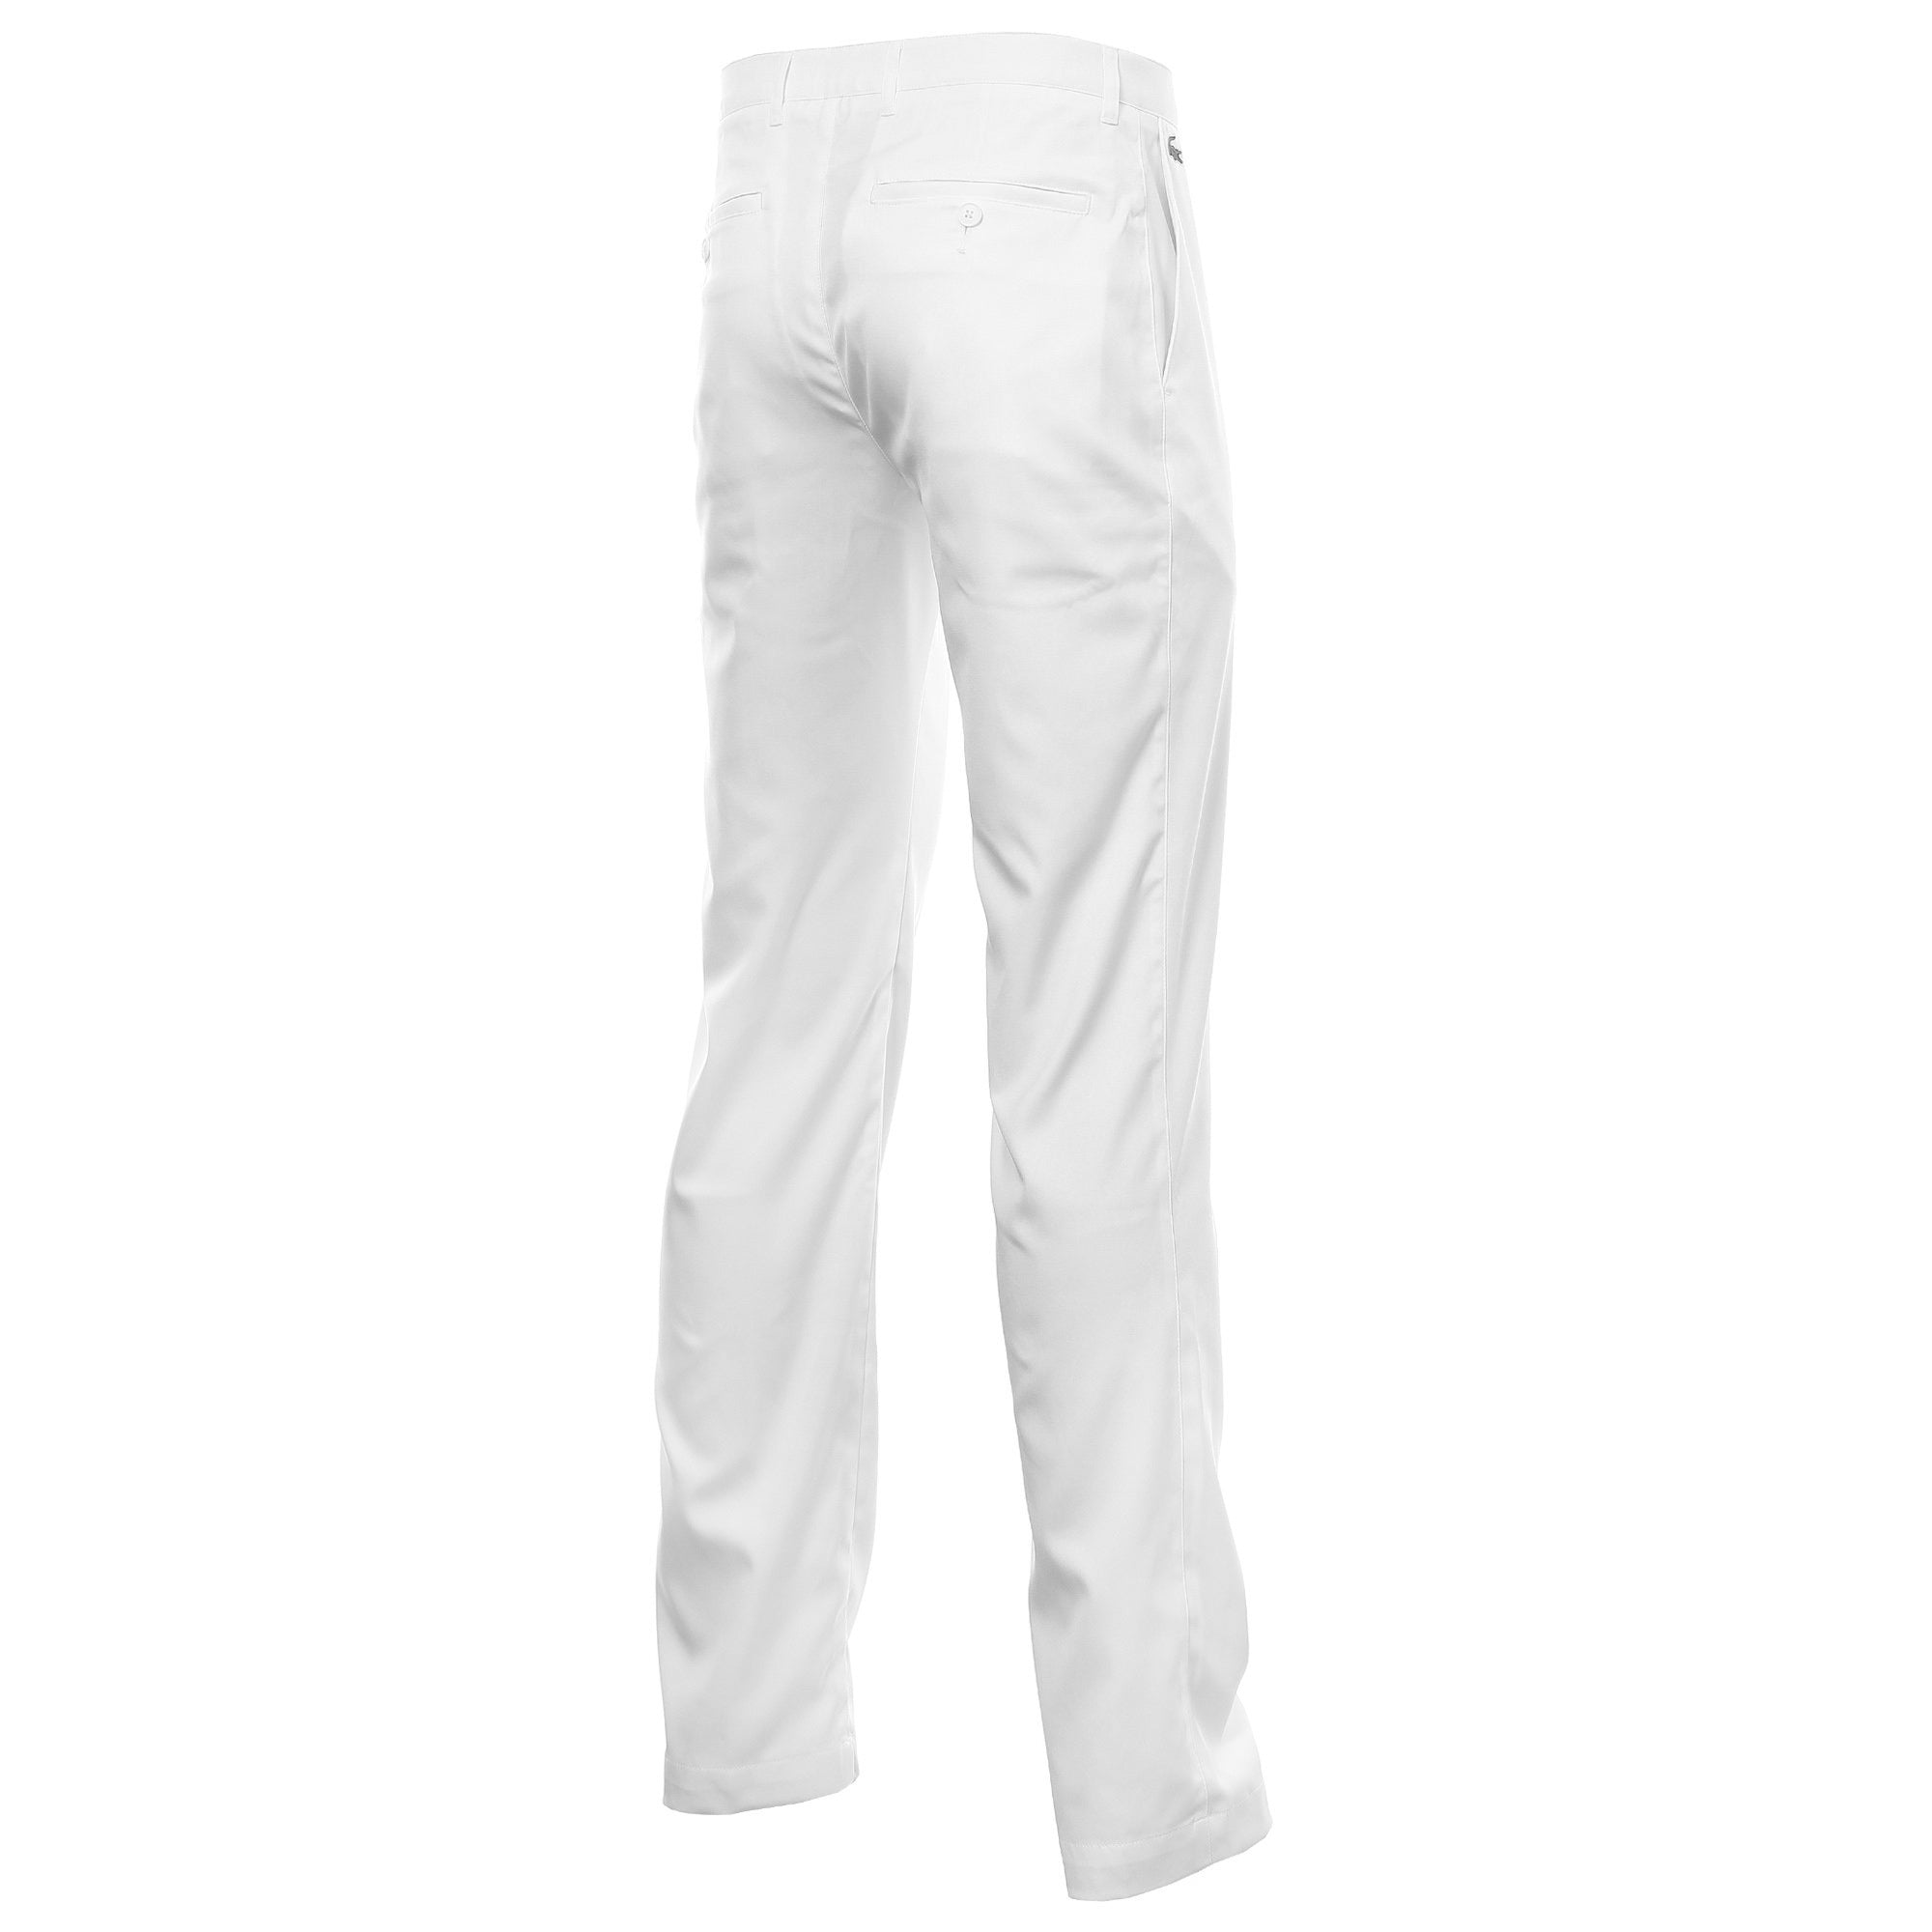 lacoste-technical-chino-pant-hh9528-cw-white